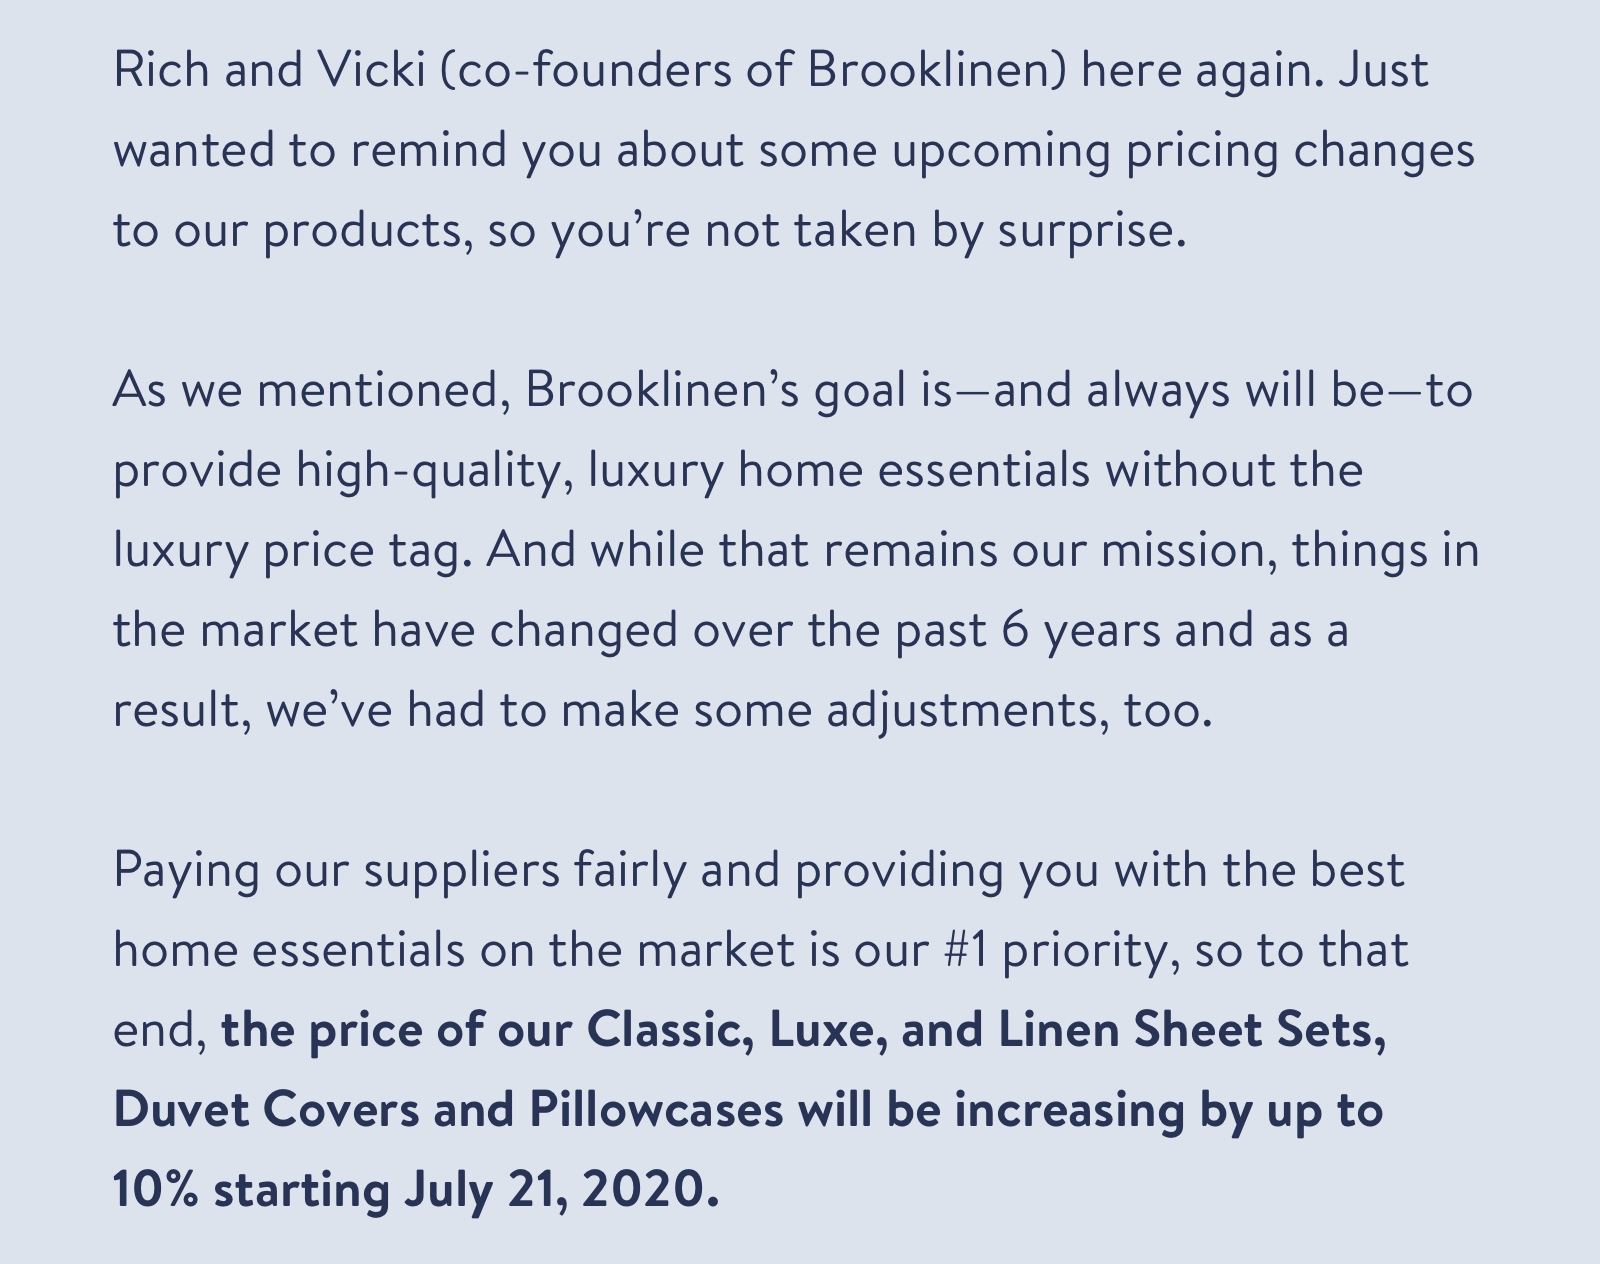 Rich and Vicki (co-founders of Brooklinen) here again. Just wanted to remind you about some upcoming pricing changes to our products, so you're not taken by surprise. As we mentioned, Brooklinen's goal is-and always will be-to provide high-quality, luxury home essentials without the luxury price tag. And while that remains our mission, things in the market have changed over the past 6 years and as a result, we've had to make some adjustments, too. Paying our suppliers fairly and providing you with the best home essentials on the market is our #1 priority, so to that end, the price of our Classic, Luxe, and Linen Sheet Sets, Duvet Covers and Pillowcases will be increasing by up to 10% starting July 21, 2020.